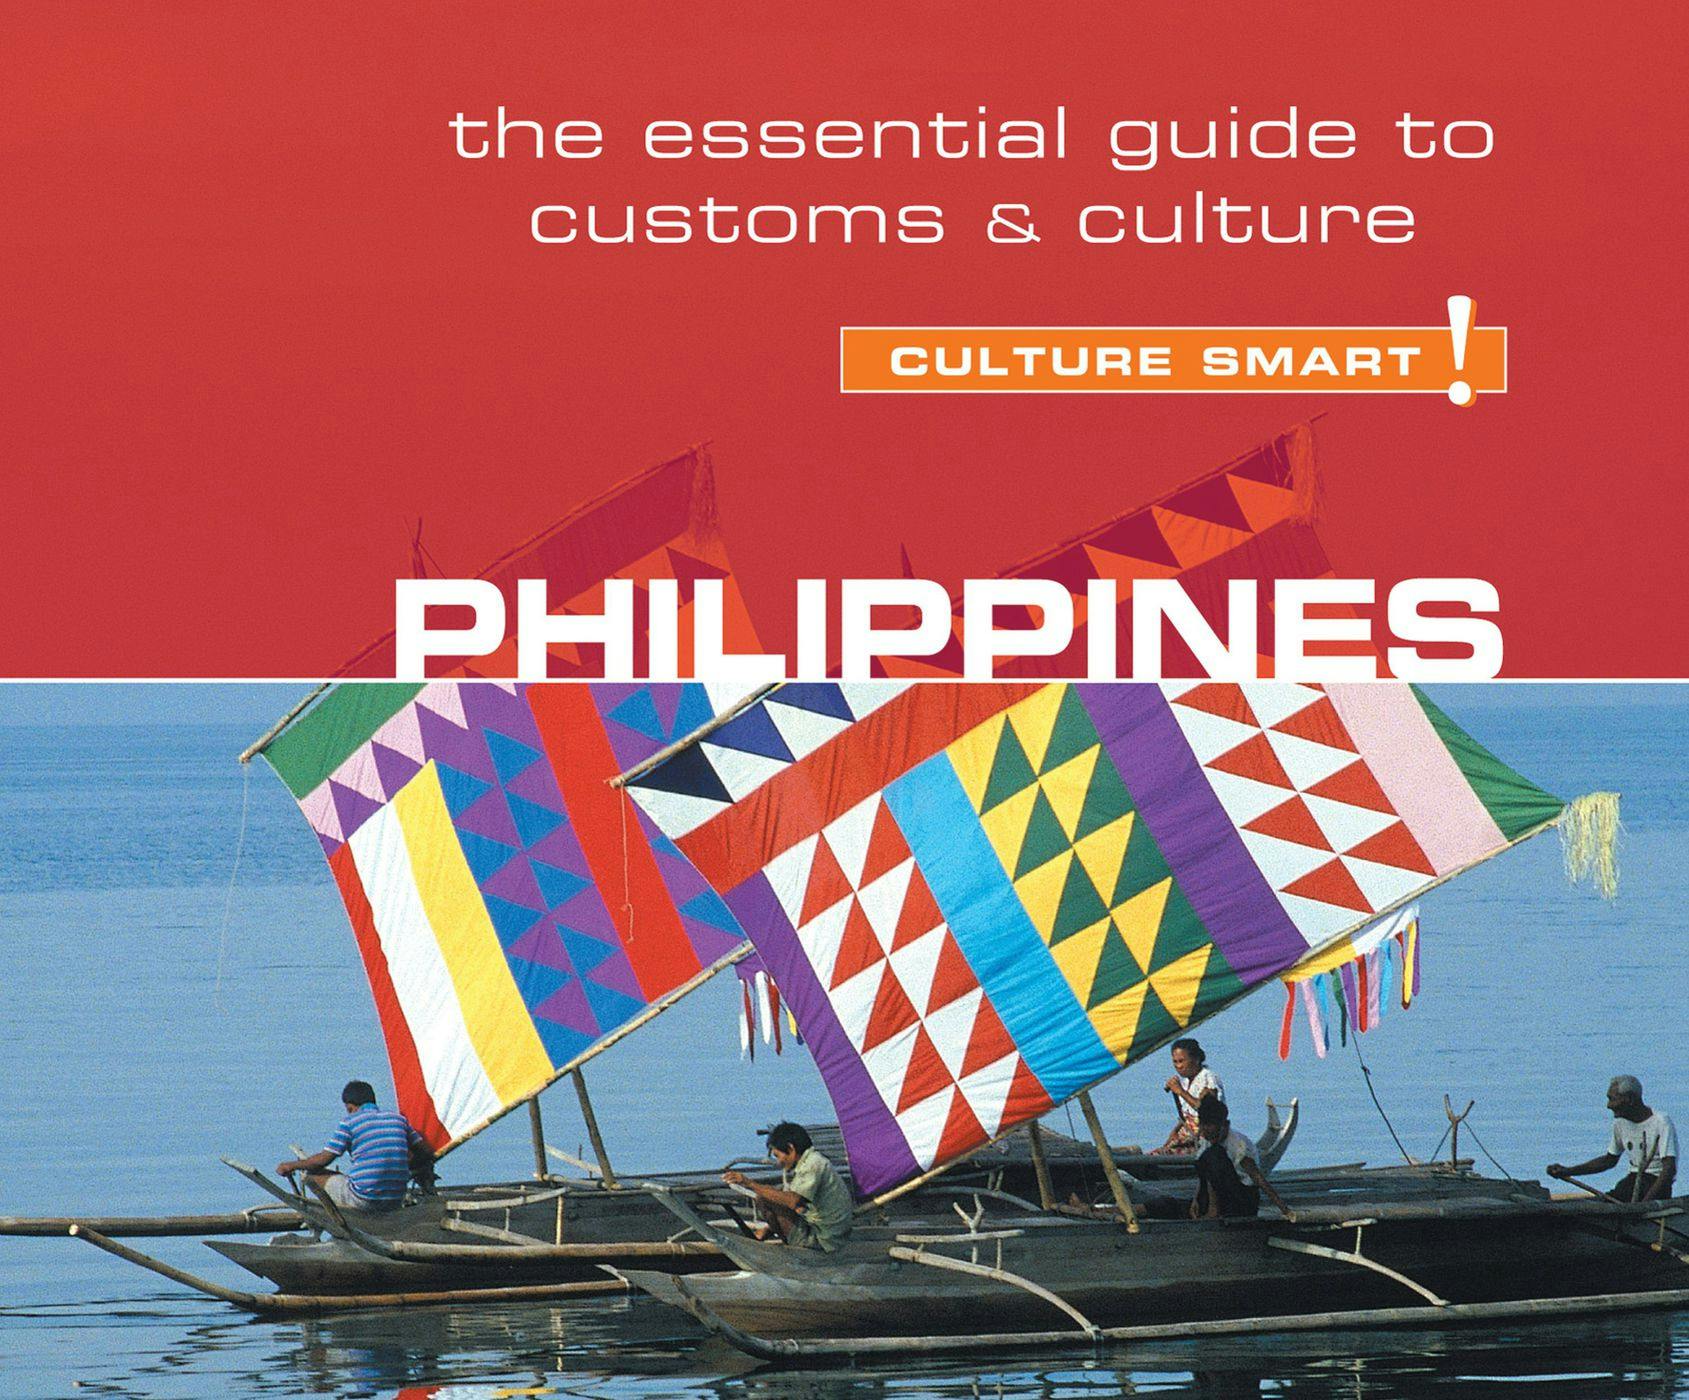 Philippines - Culture Smart! - The Essential Guide to Customs & Culture (Unabridged) - undefined